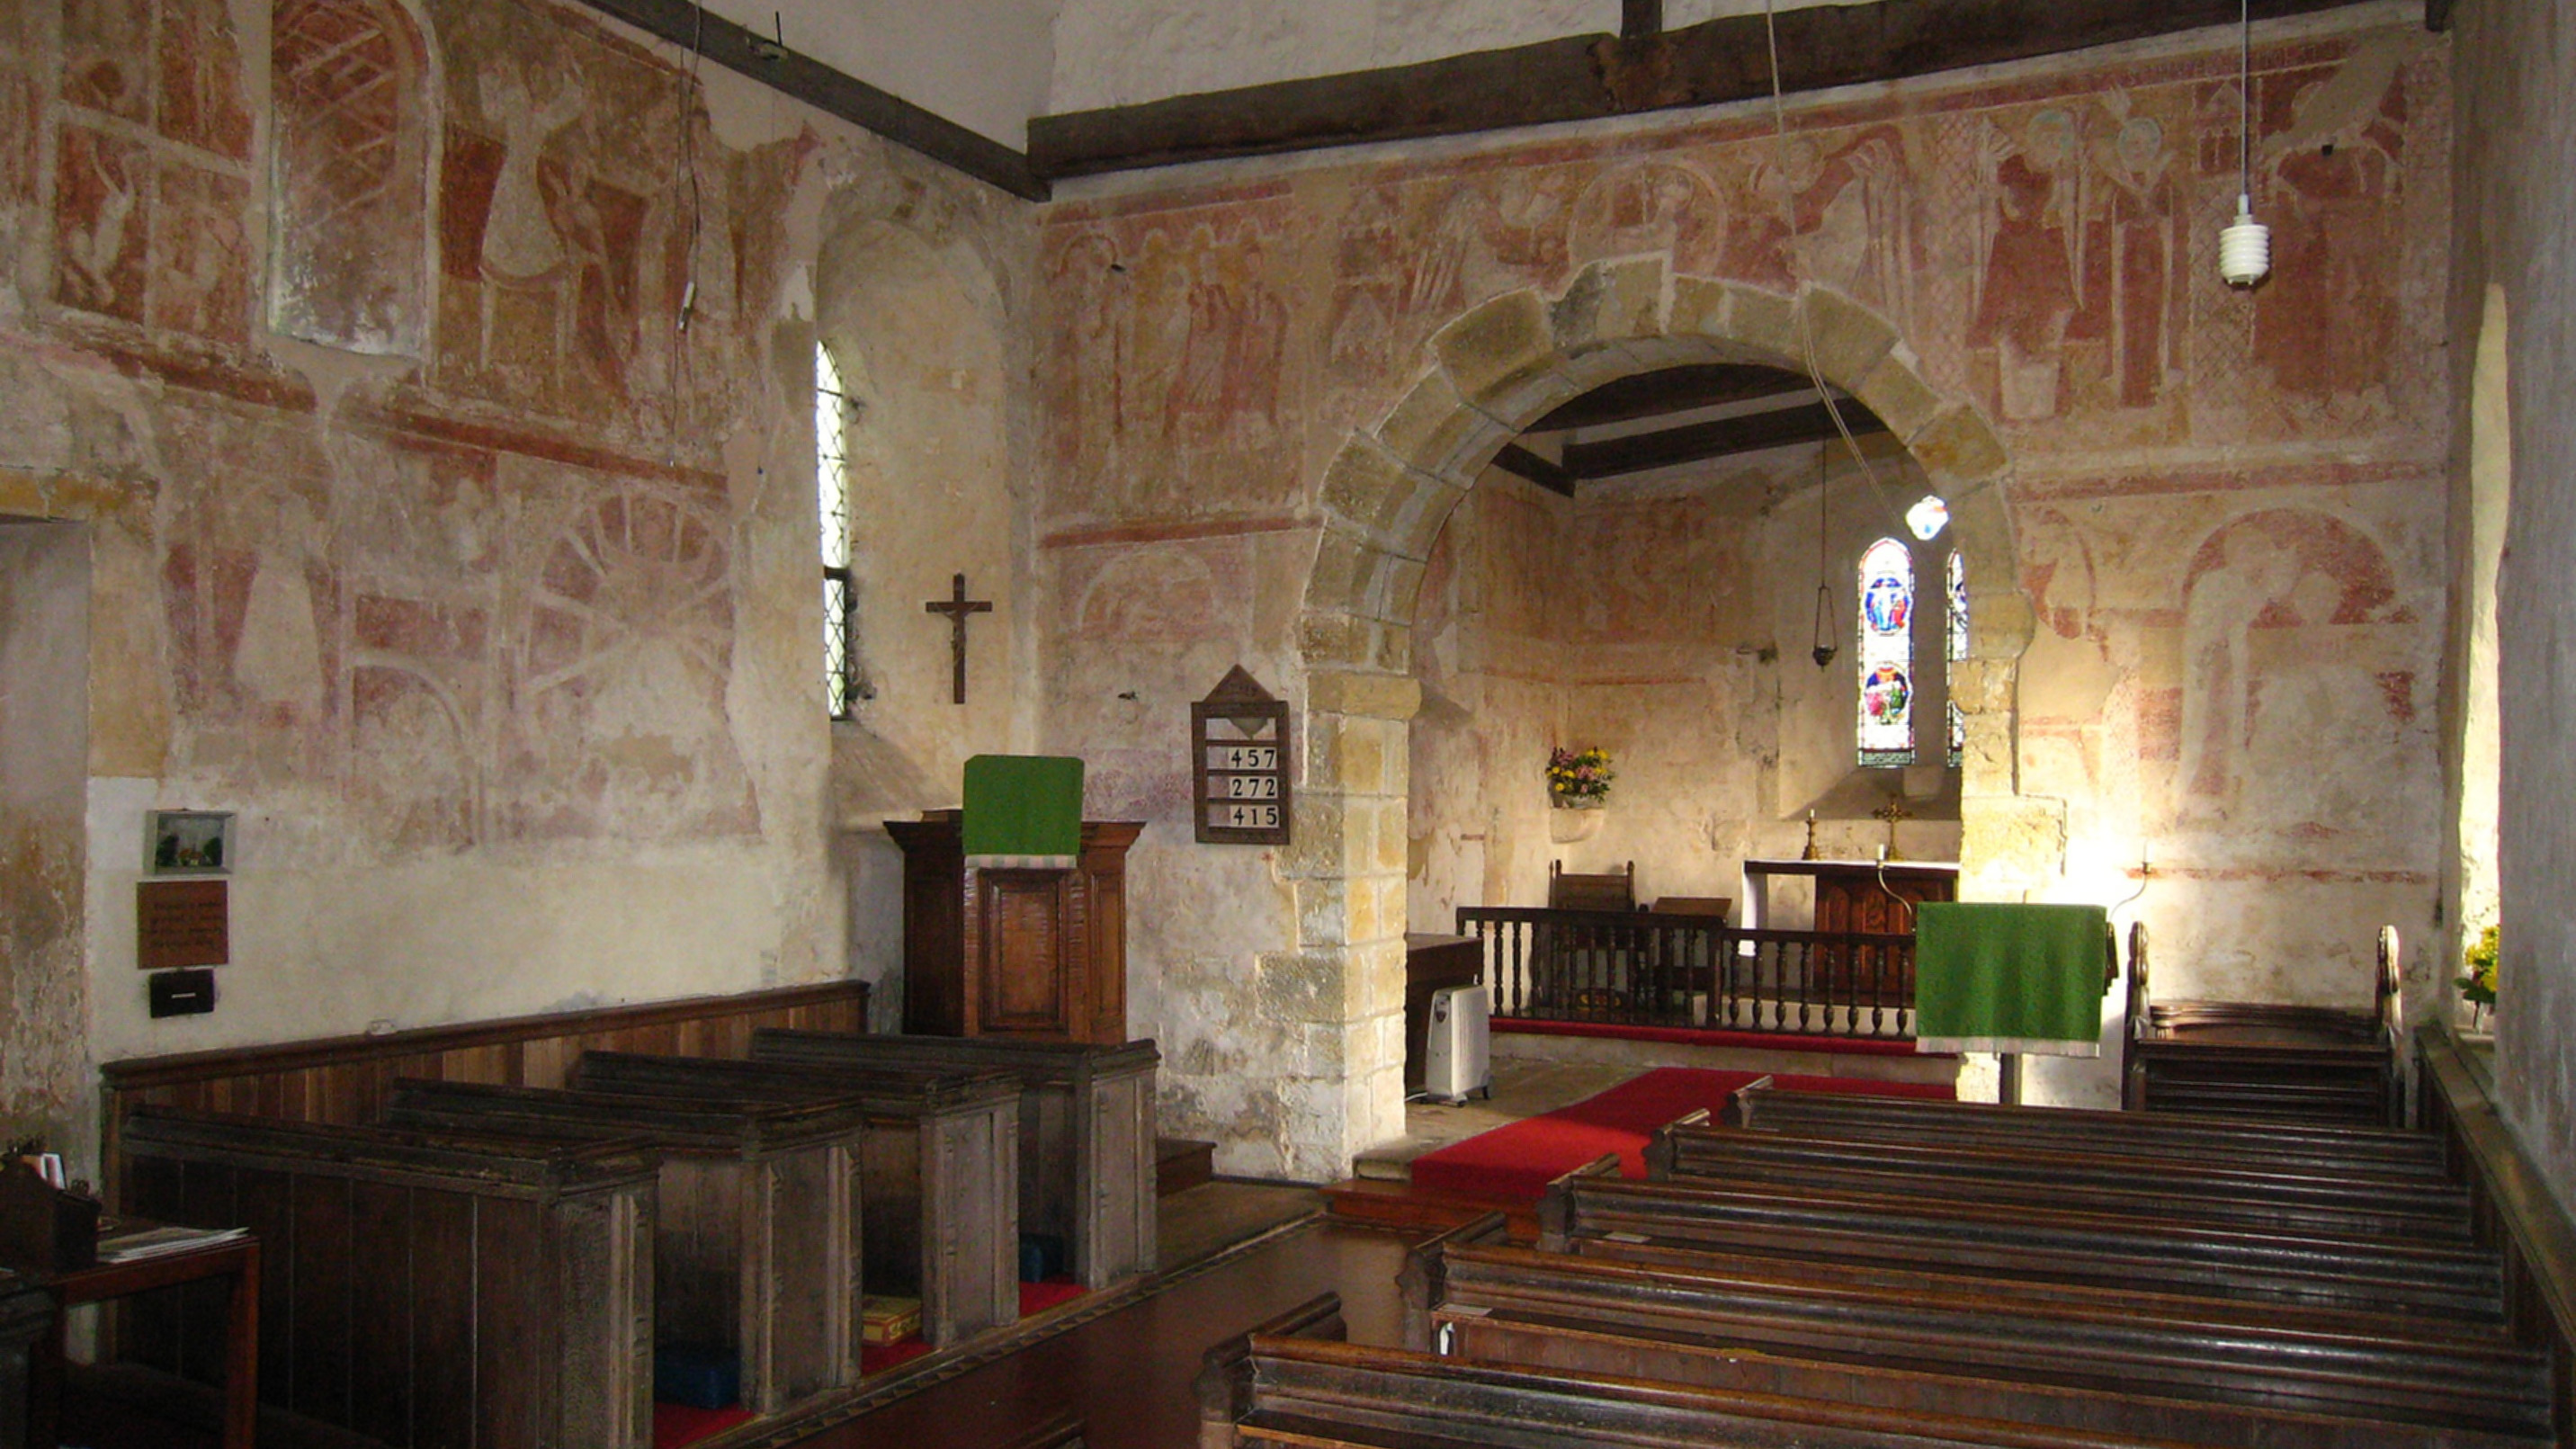 The interior wall paintings at St Botolph’s Church are pictured in Hardham, West Sussex (Michael Coppins/Wikimedia Commons)